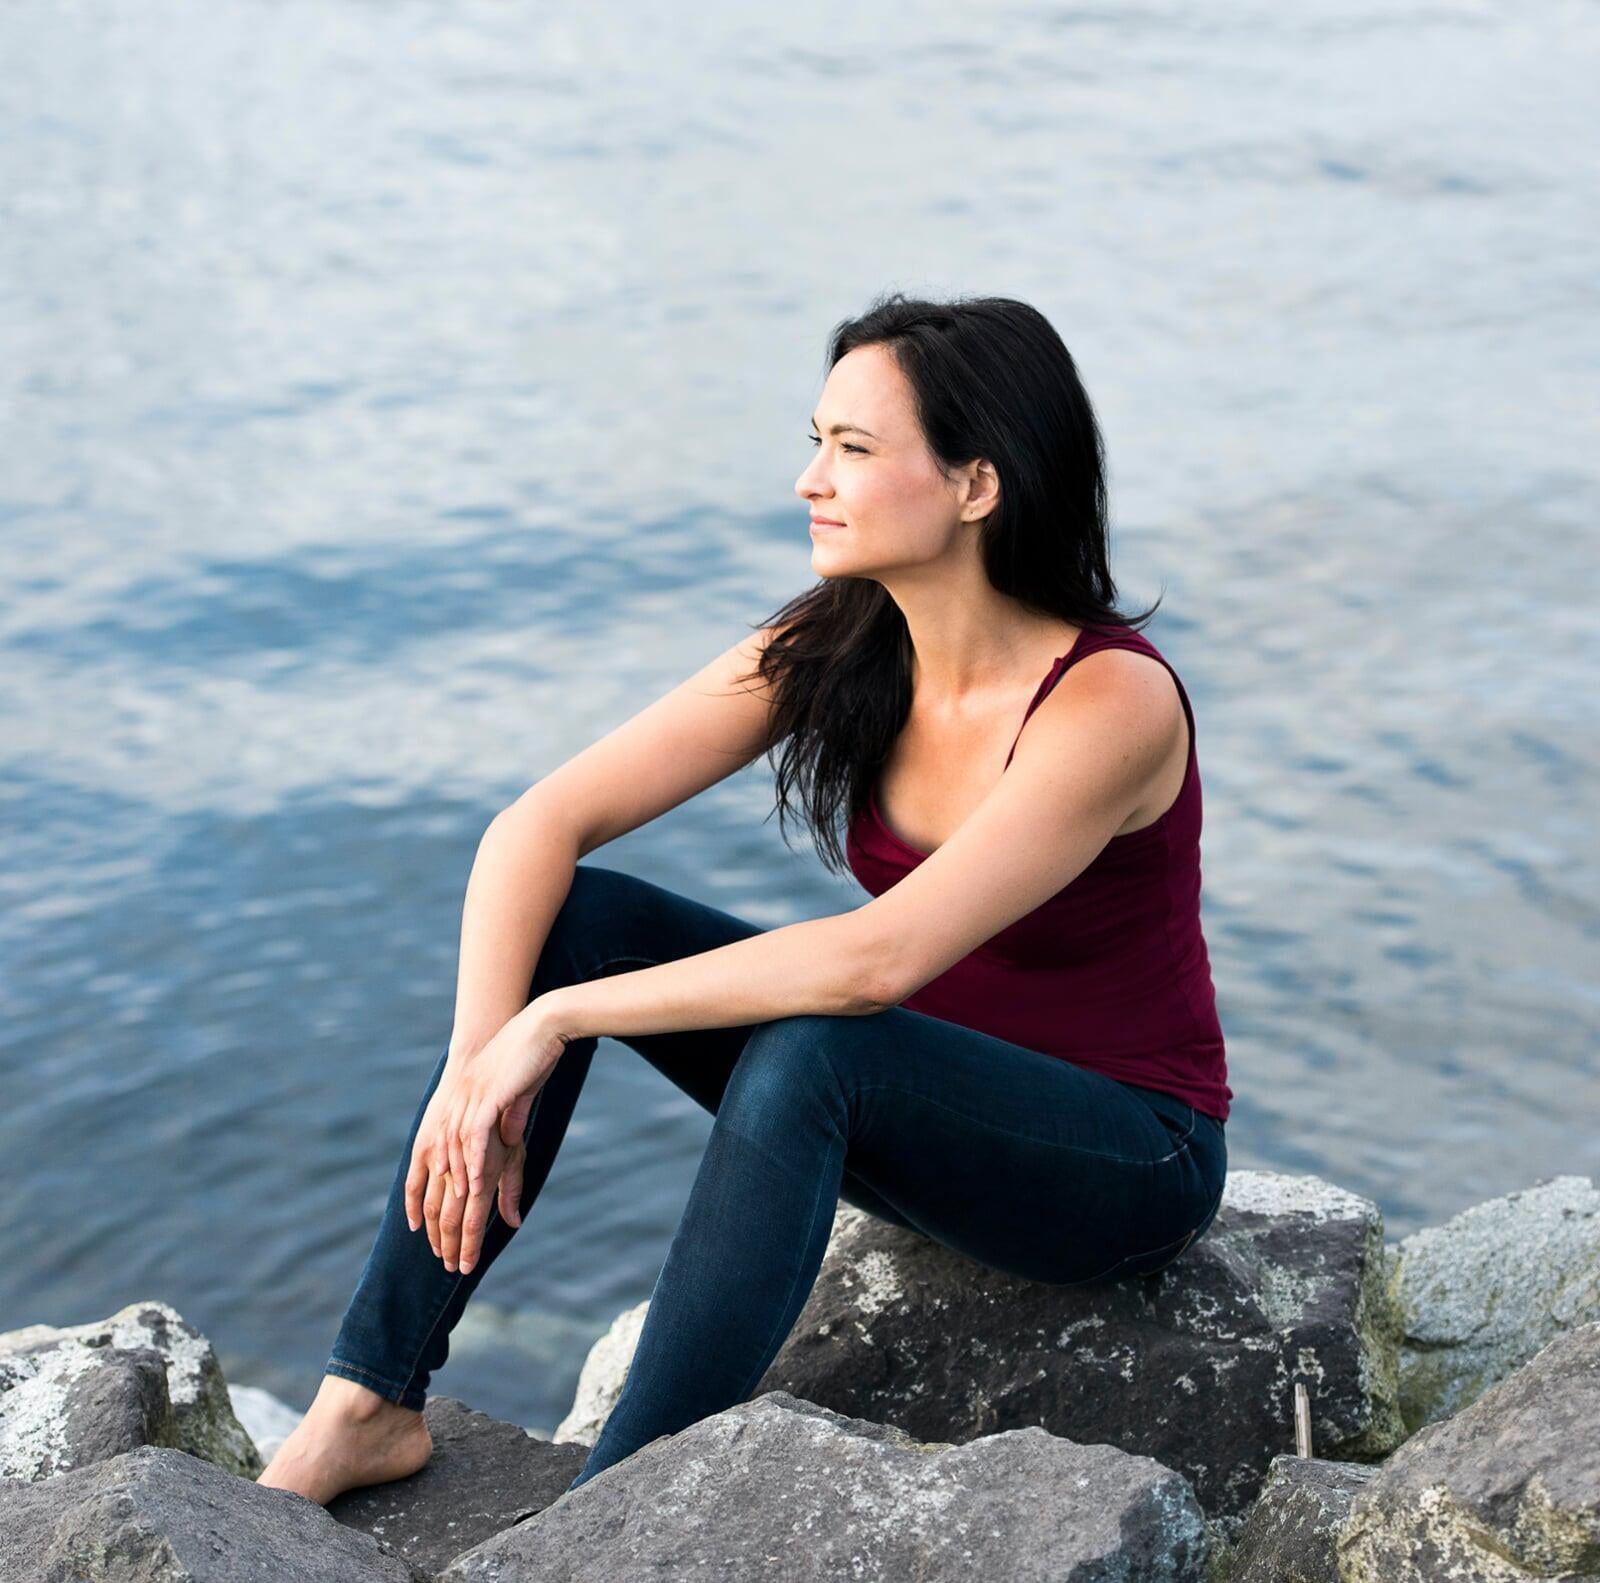 Photo of Emilie Leclerc sitting on a rock at the water's edge. She has long dark hair, is wearing a red tank top and jeans, and resting her elbows on her knees, looking off camera to the left.